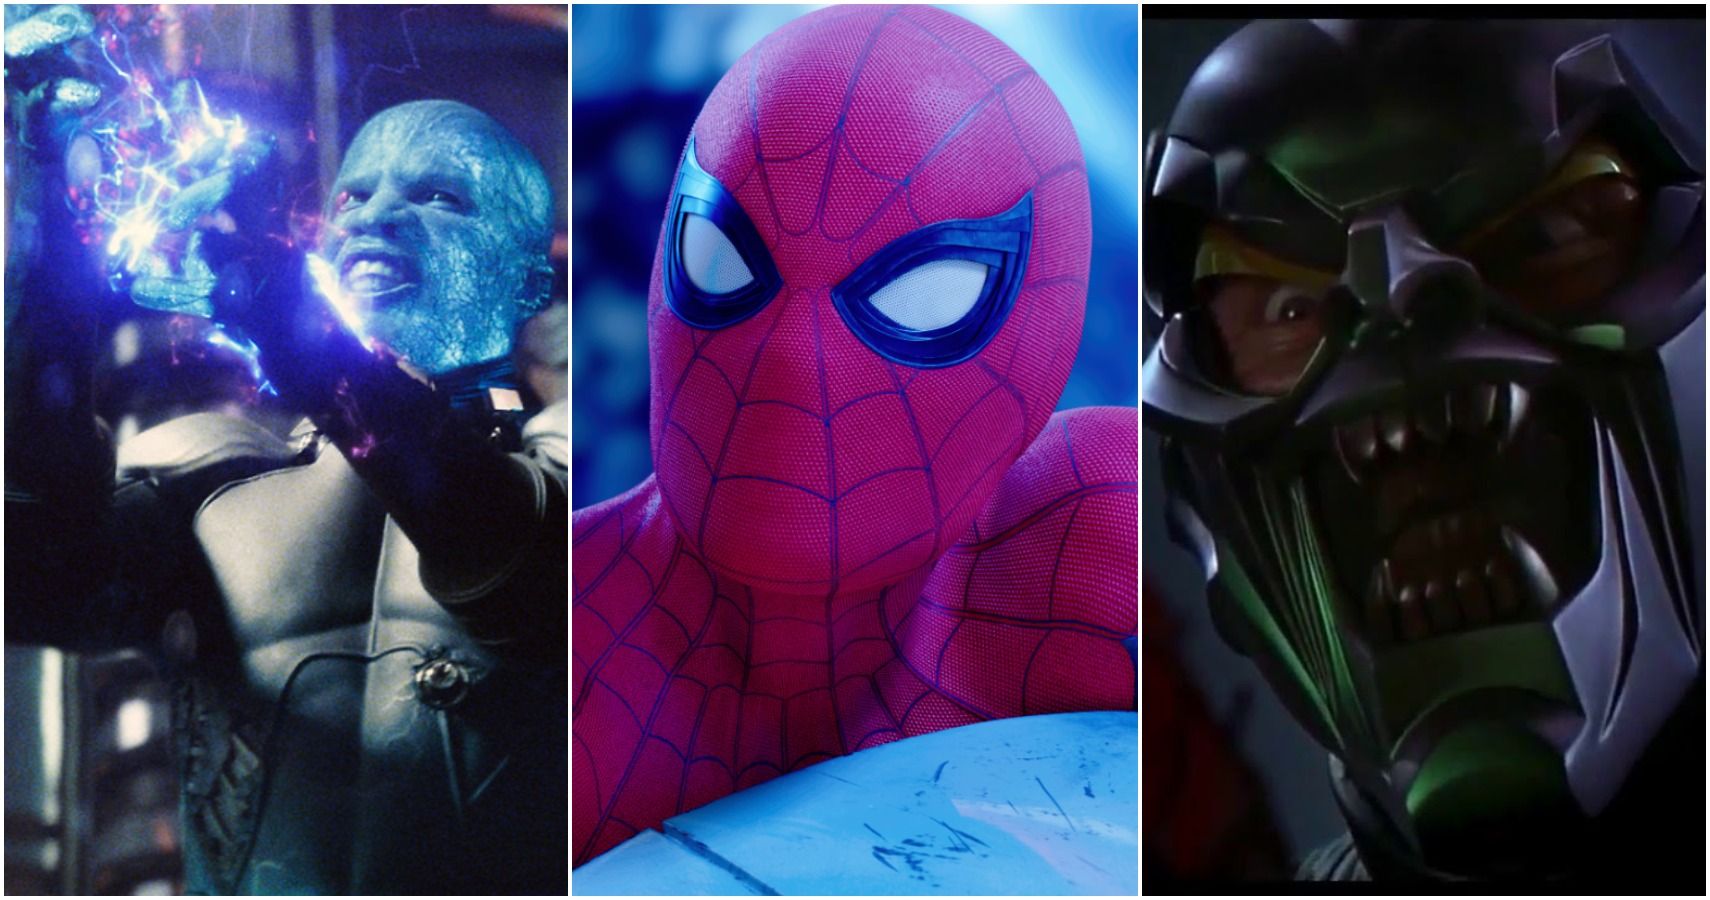 Spider-Man: Every Final Battle In His Movies, Ranked